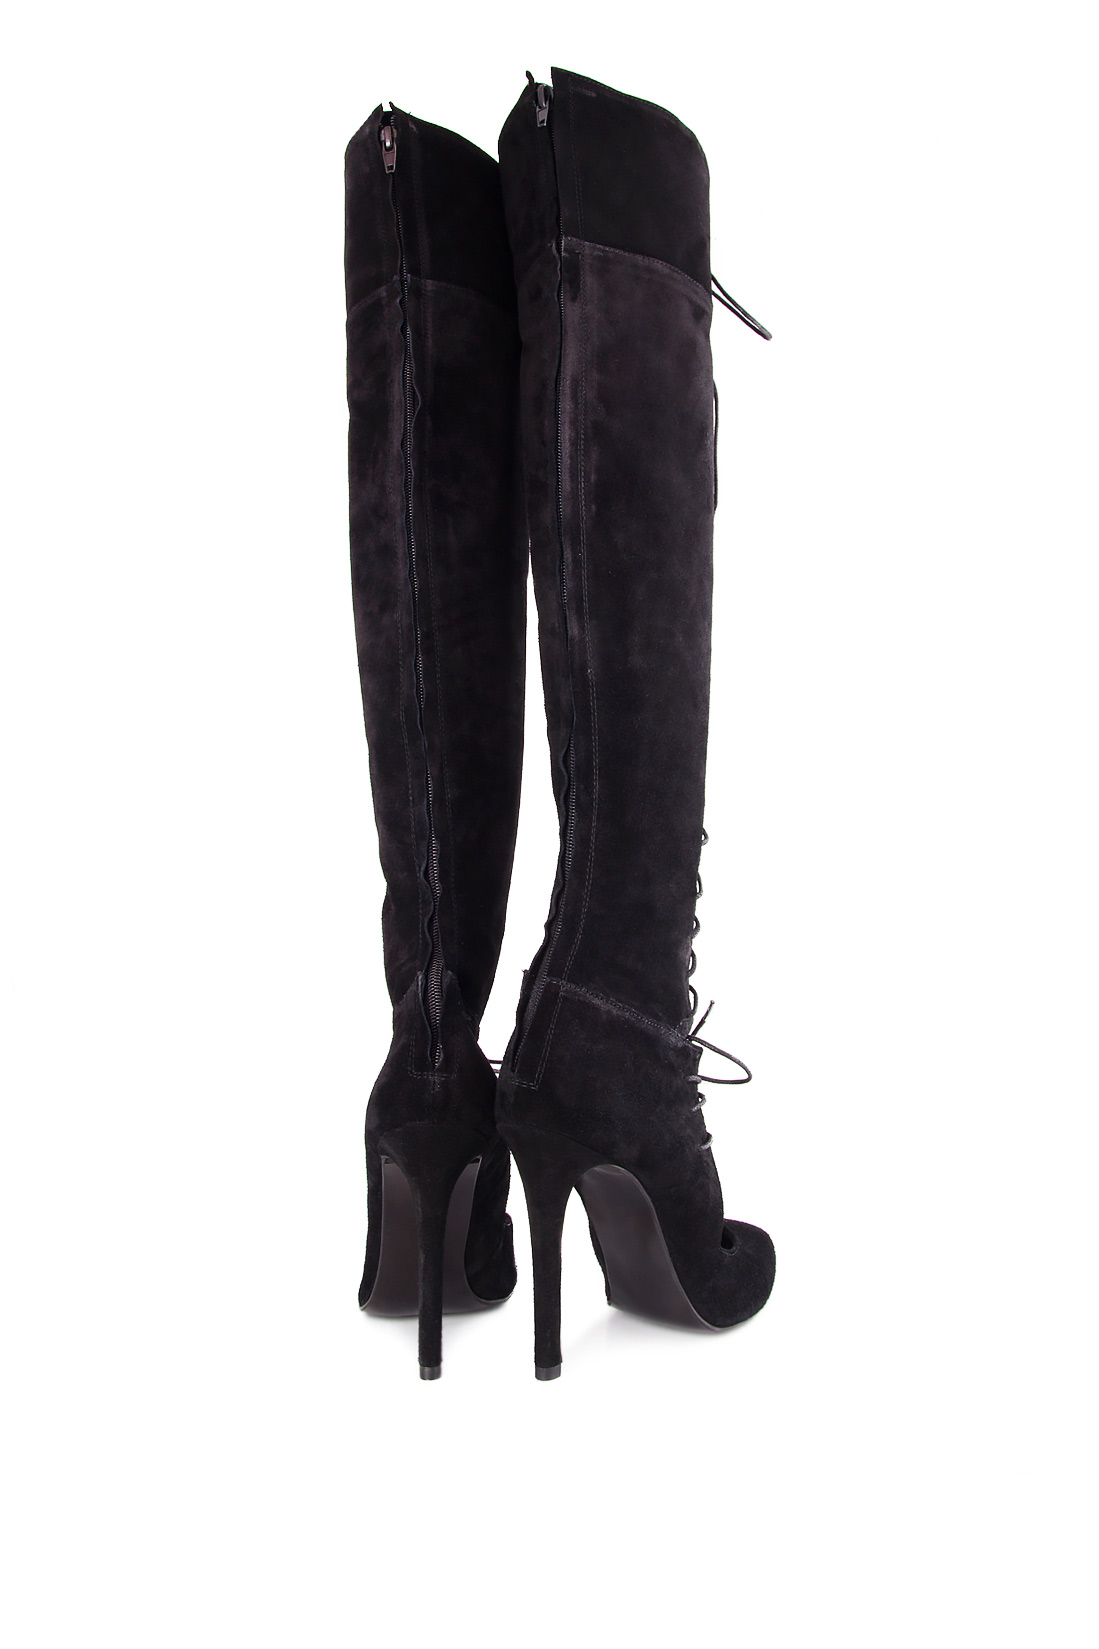 Cutout suede over-the-knee boots Ana Kaloni image 2